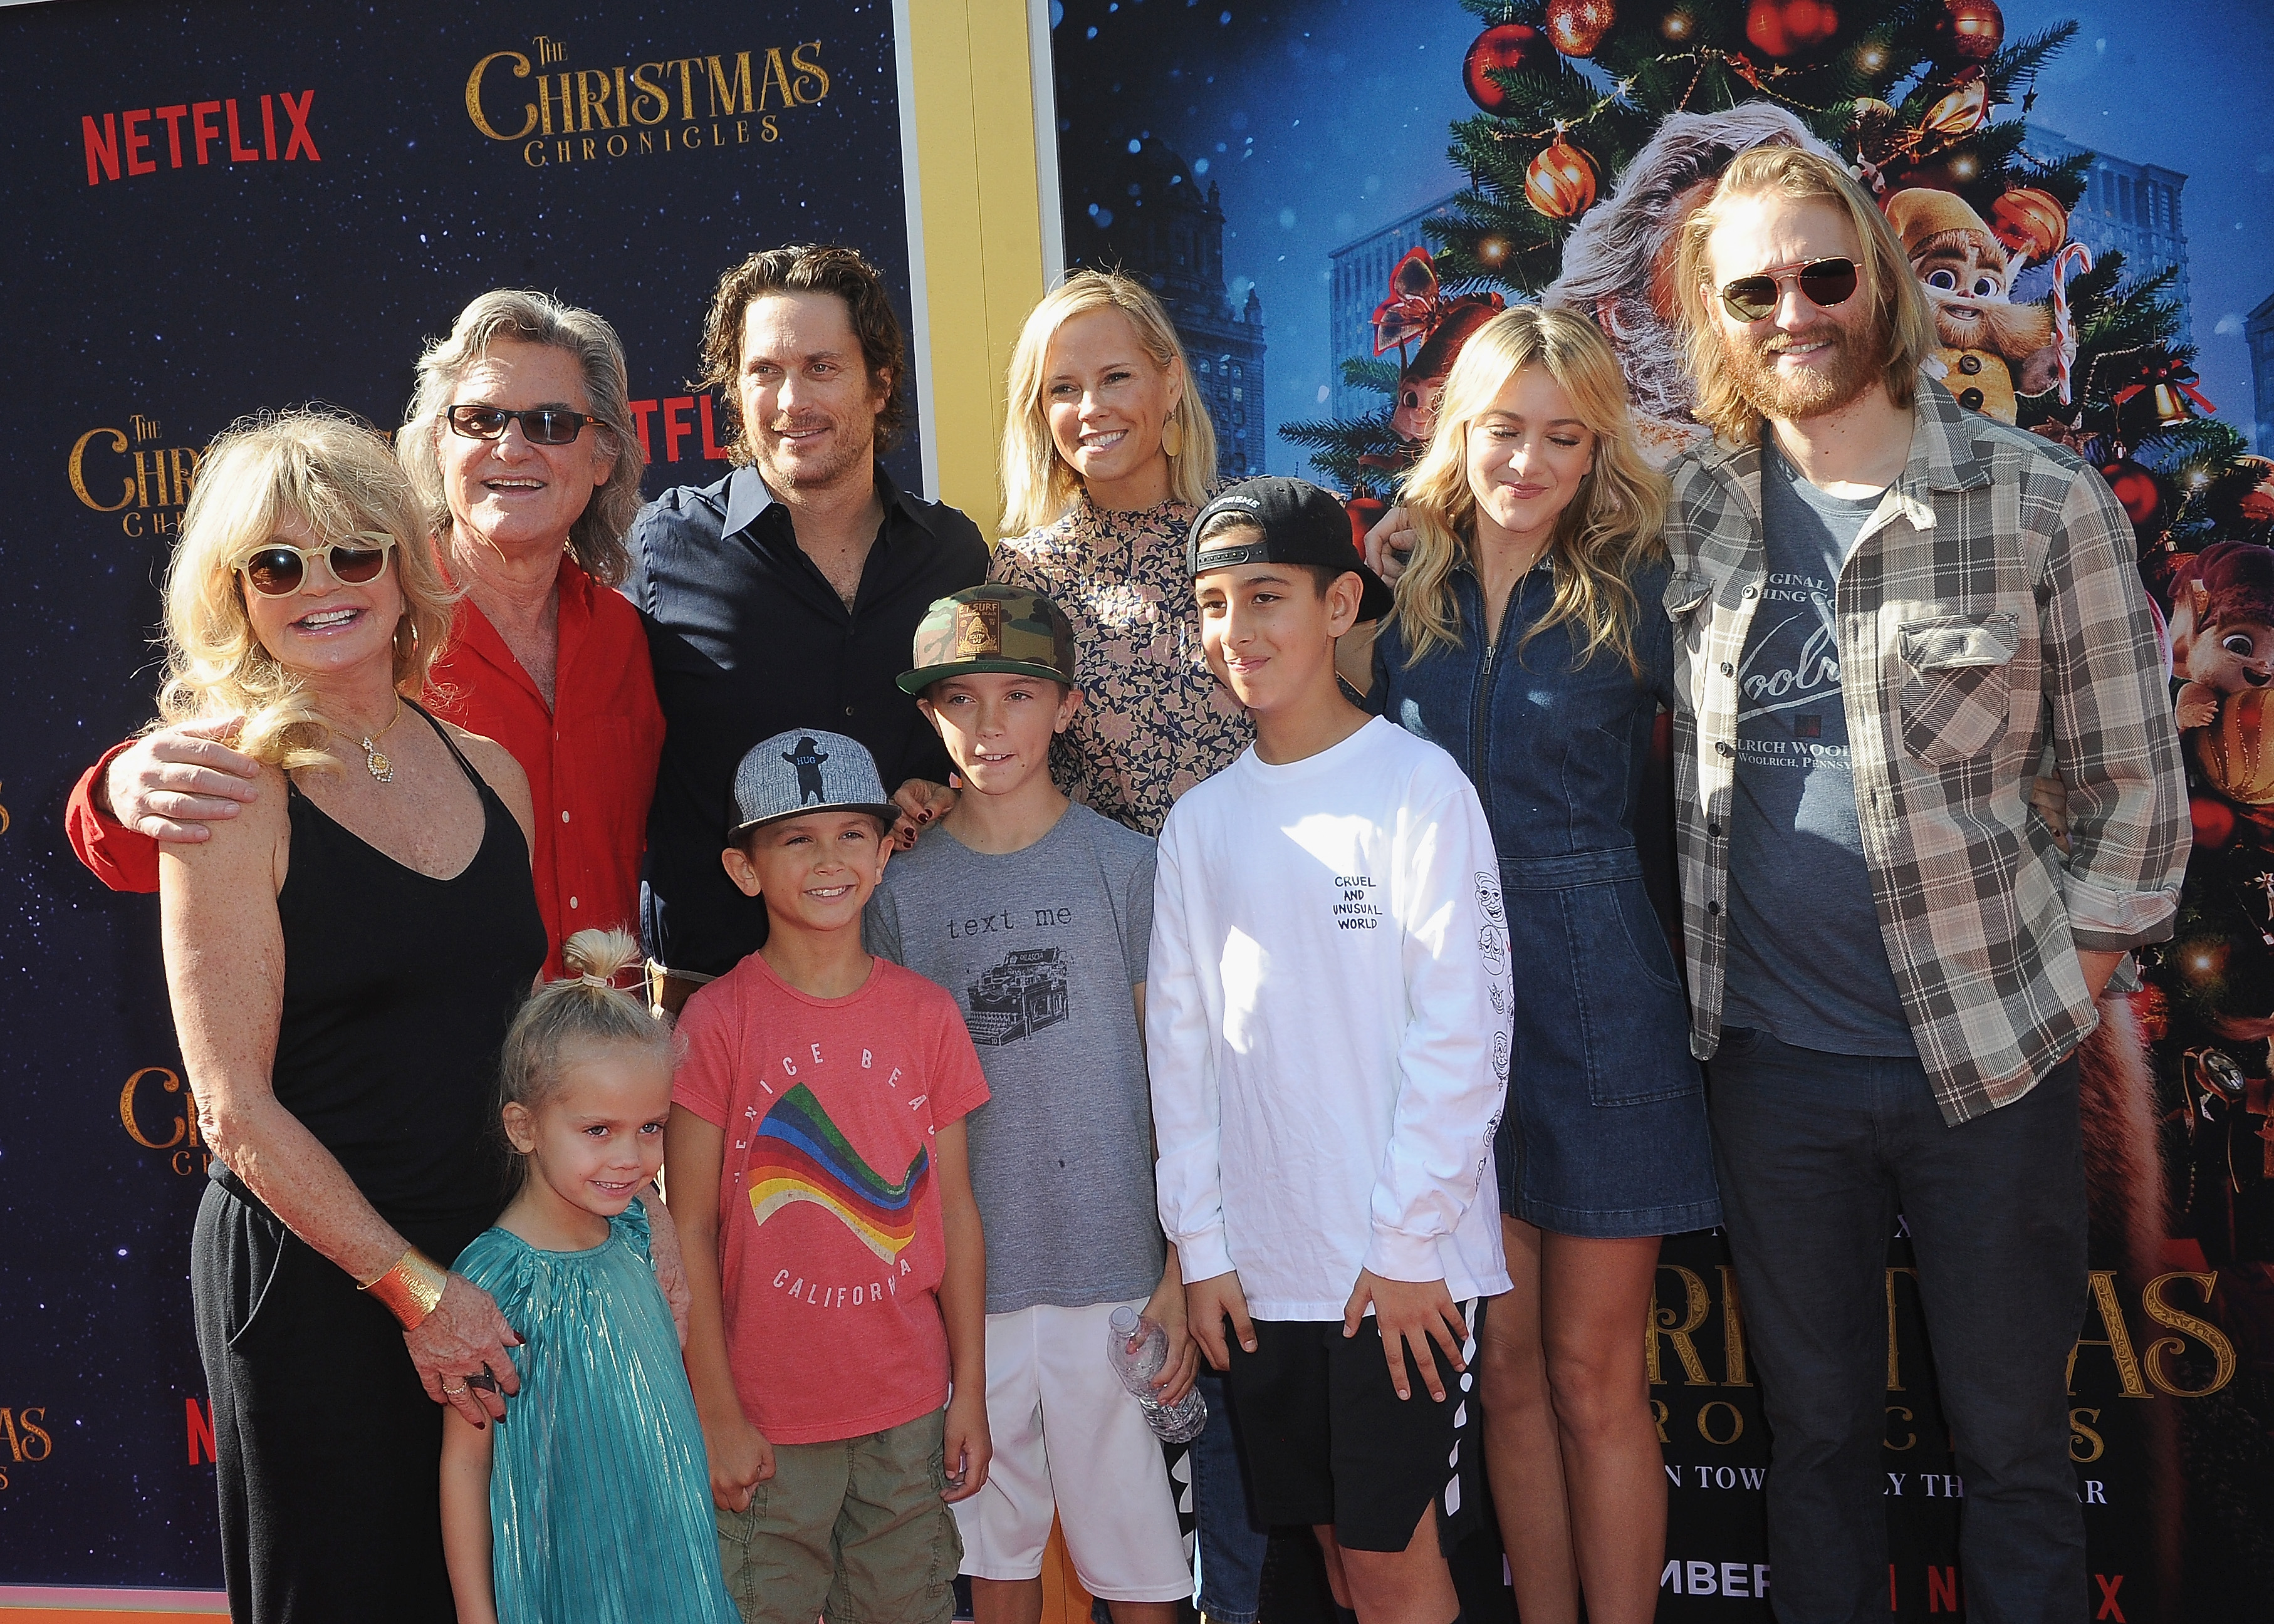 (L-R) Goldie Hawn, Kurt Russell, Oliver Hudson, Erinn Bartlett, Bodhi Hudson, Wilder Hudson, Rio Hudson, Meredith Hagner and Wyatt Russell at the premiere of "The Christmas Chronicles," 2018 | Source: Getty Images